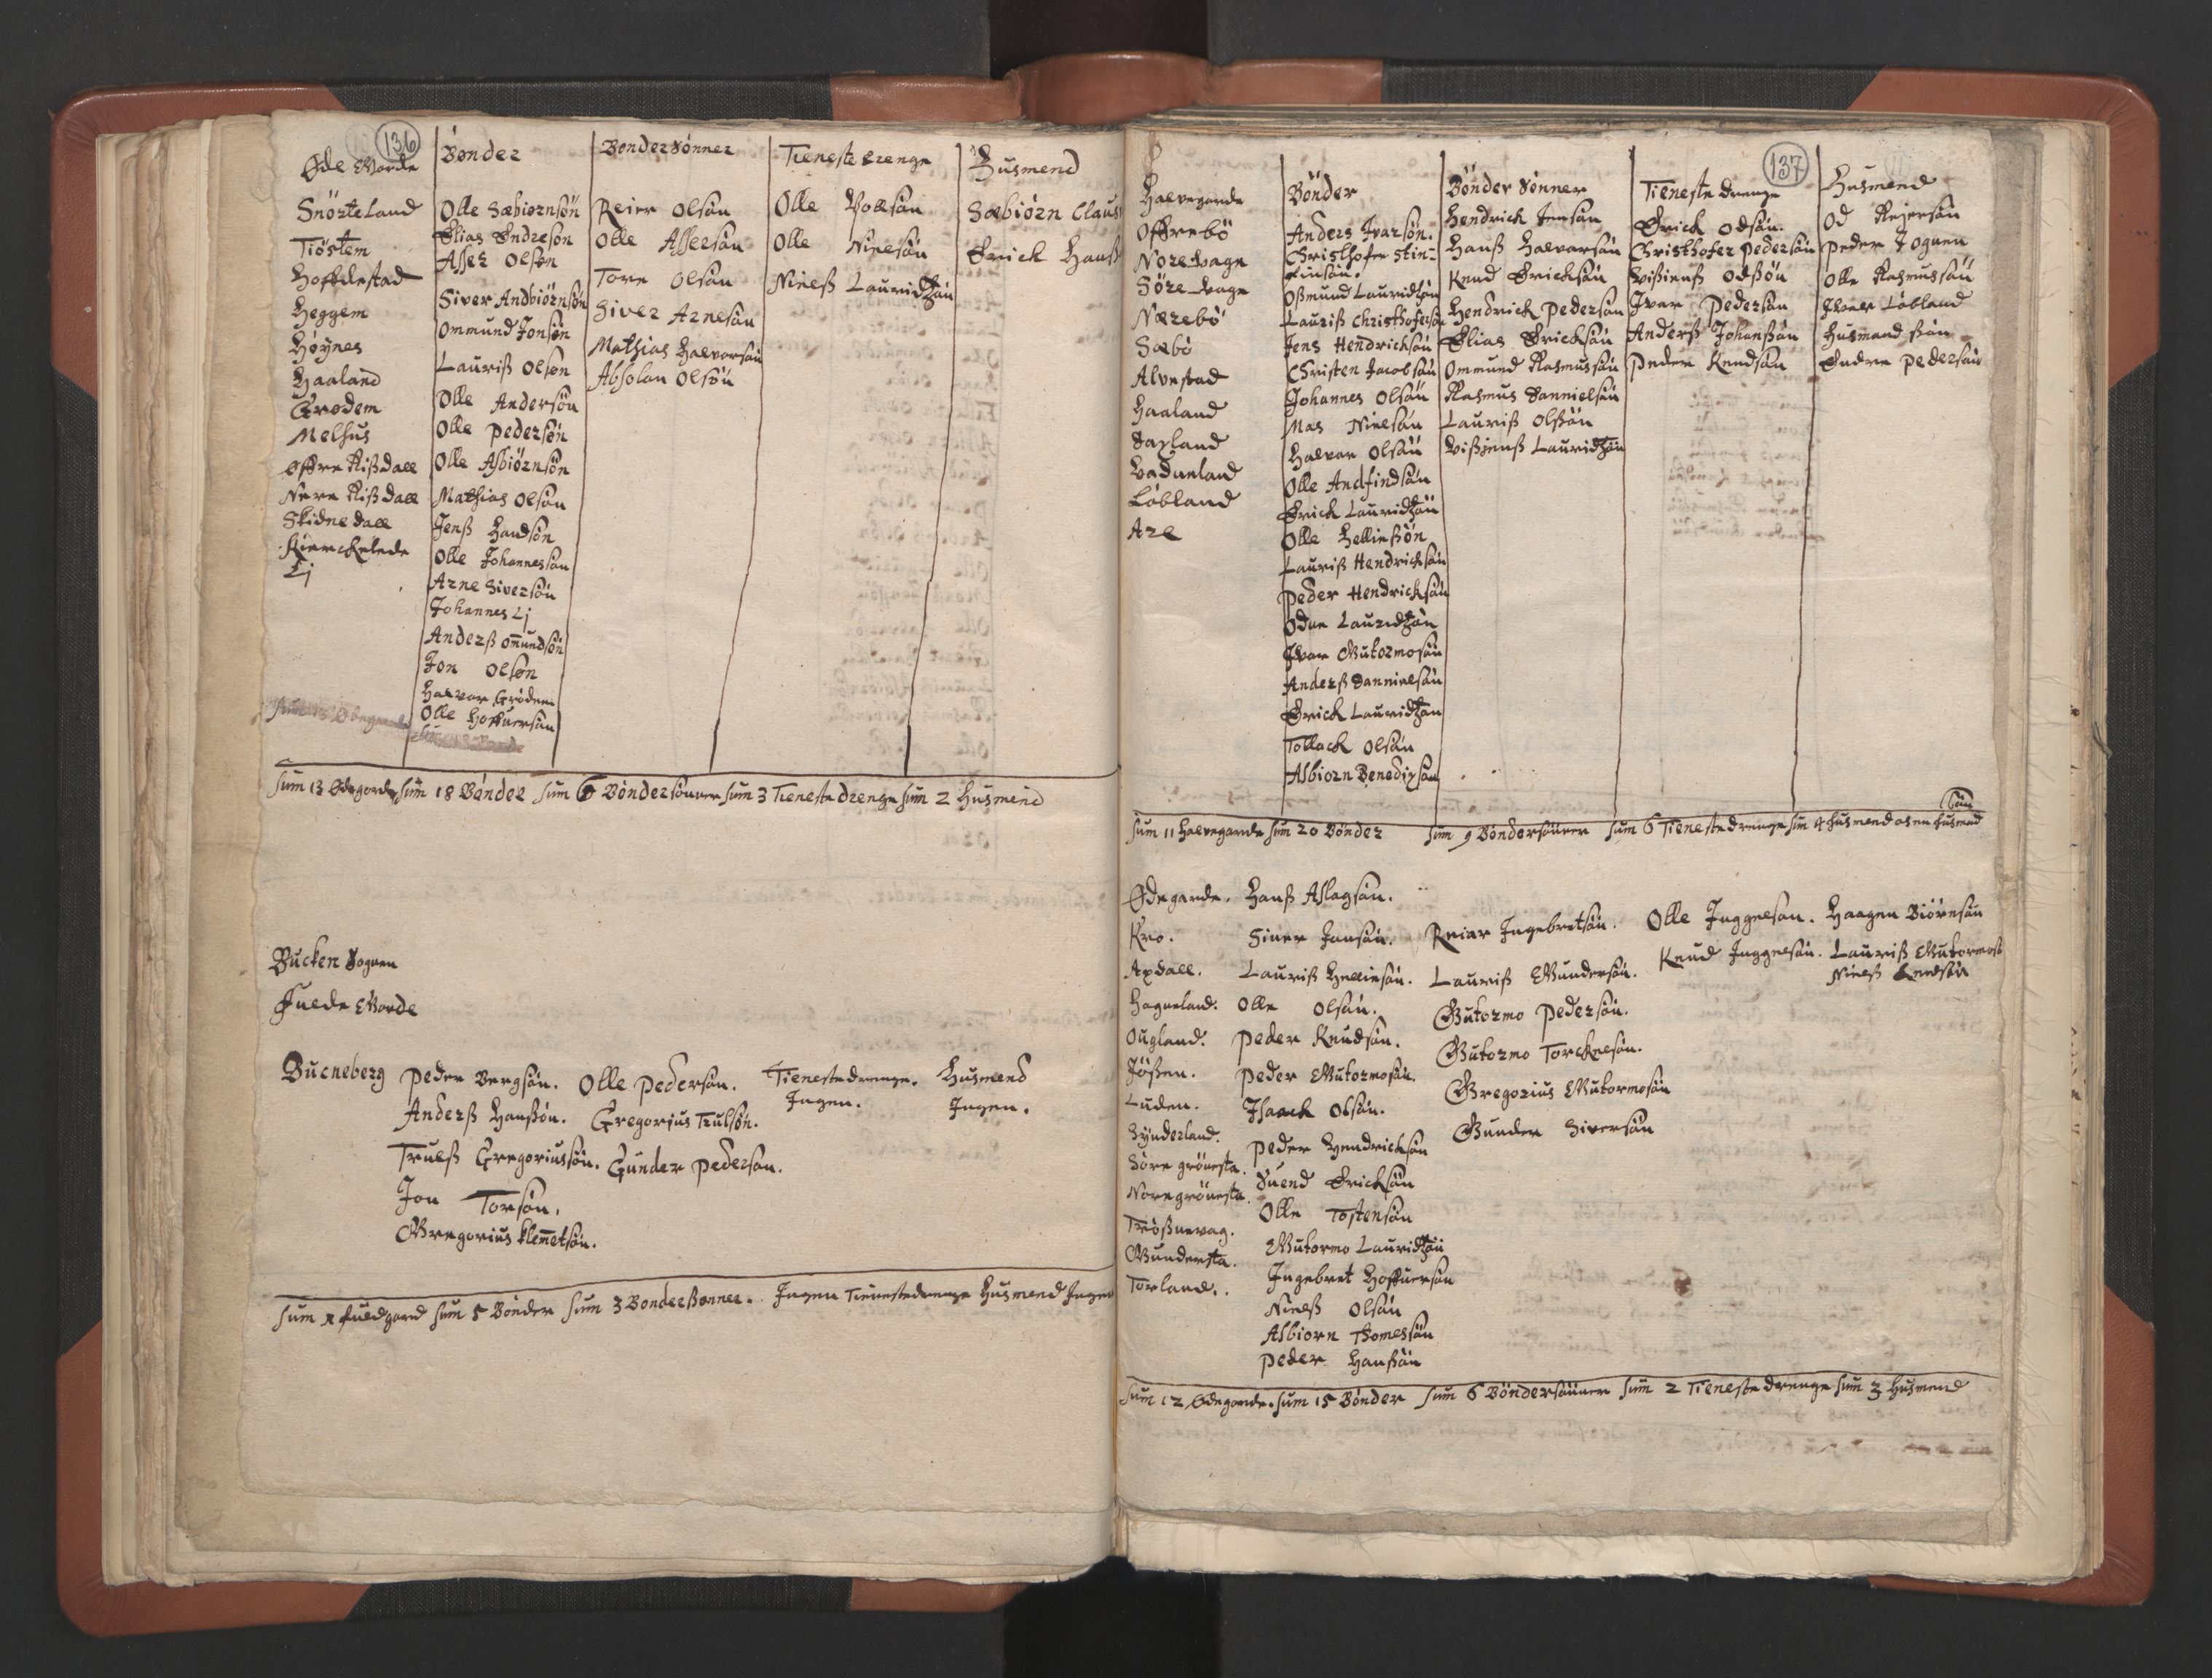 RA, Vicar's Census 1664-1666, no. 18: Stavanger deanery and Karmsund deanery, 1664-1666, p. 136-137